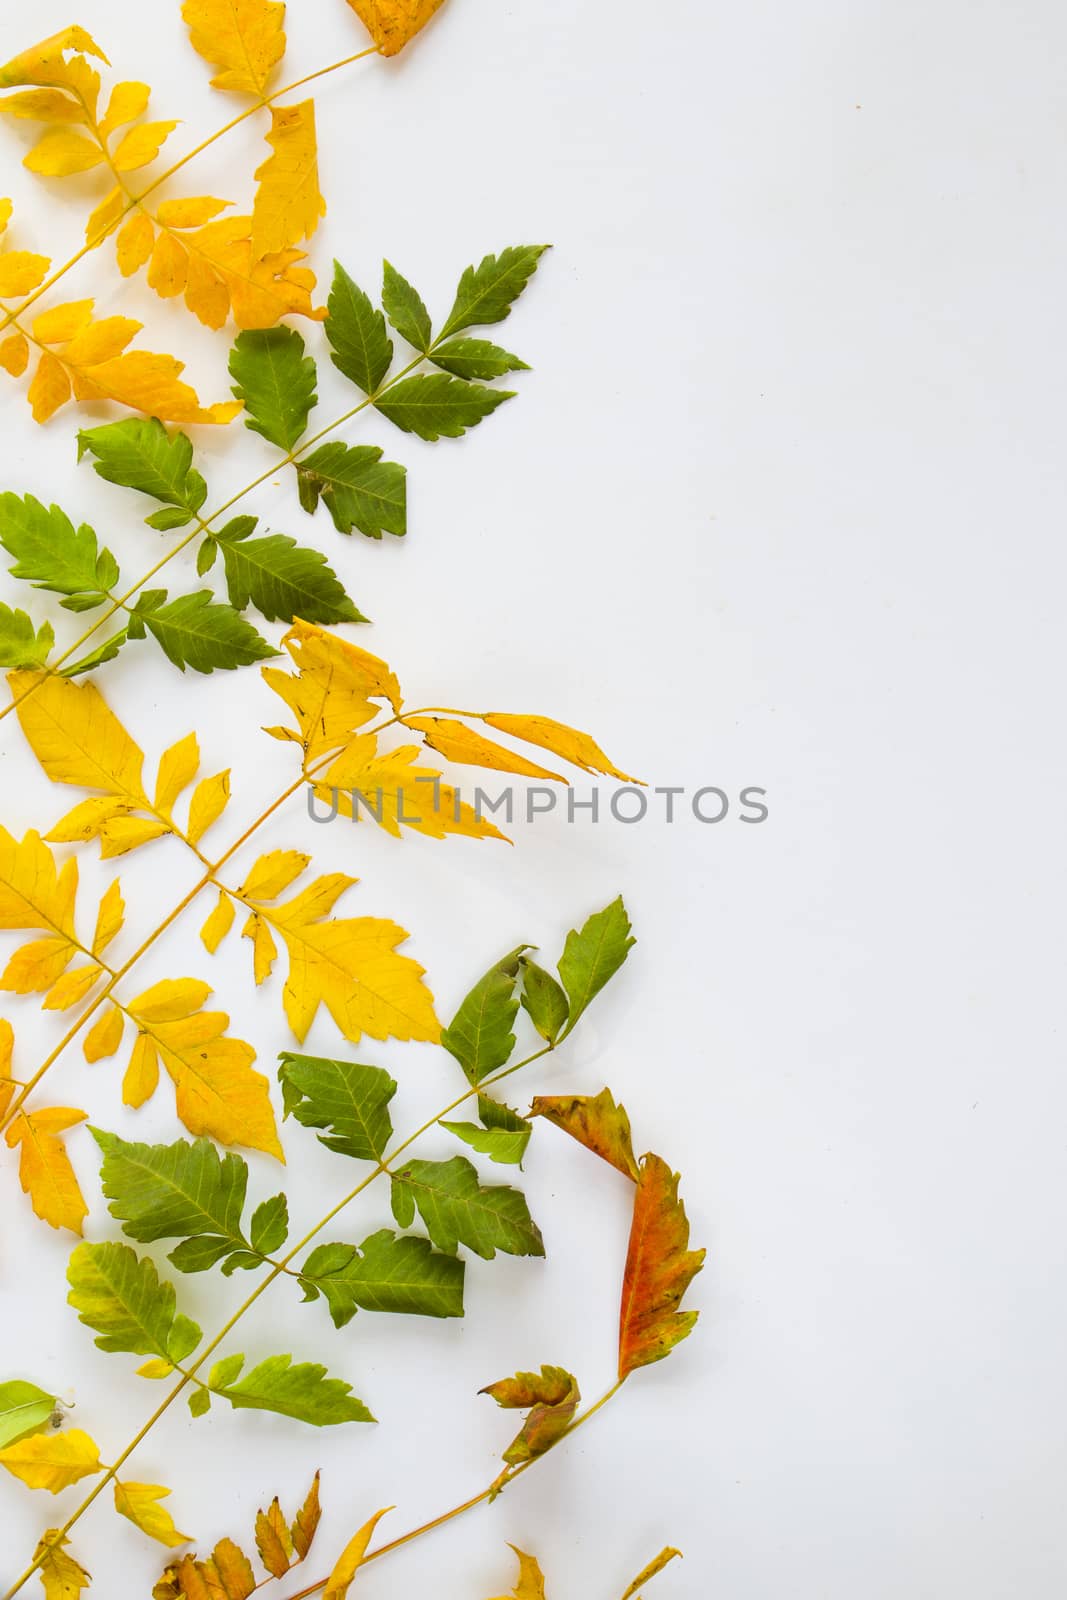 Autumn and fall colorful leaves on the white background, copy space by Taidundua